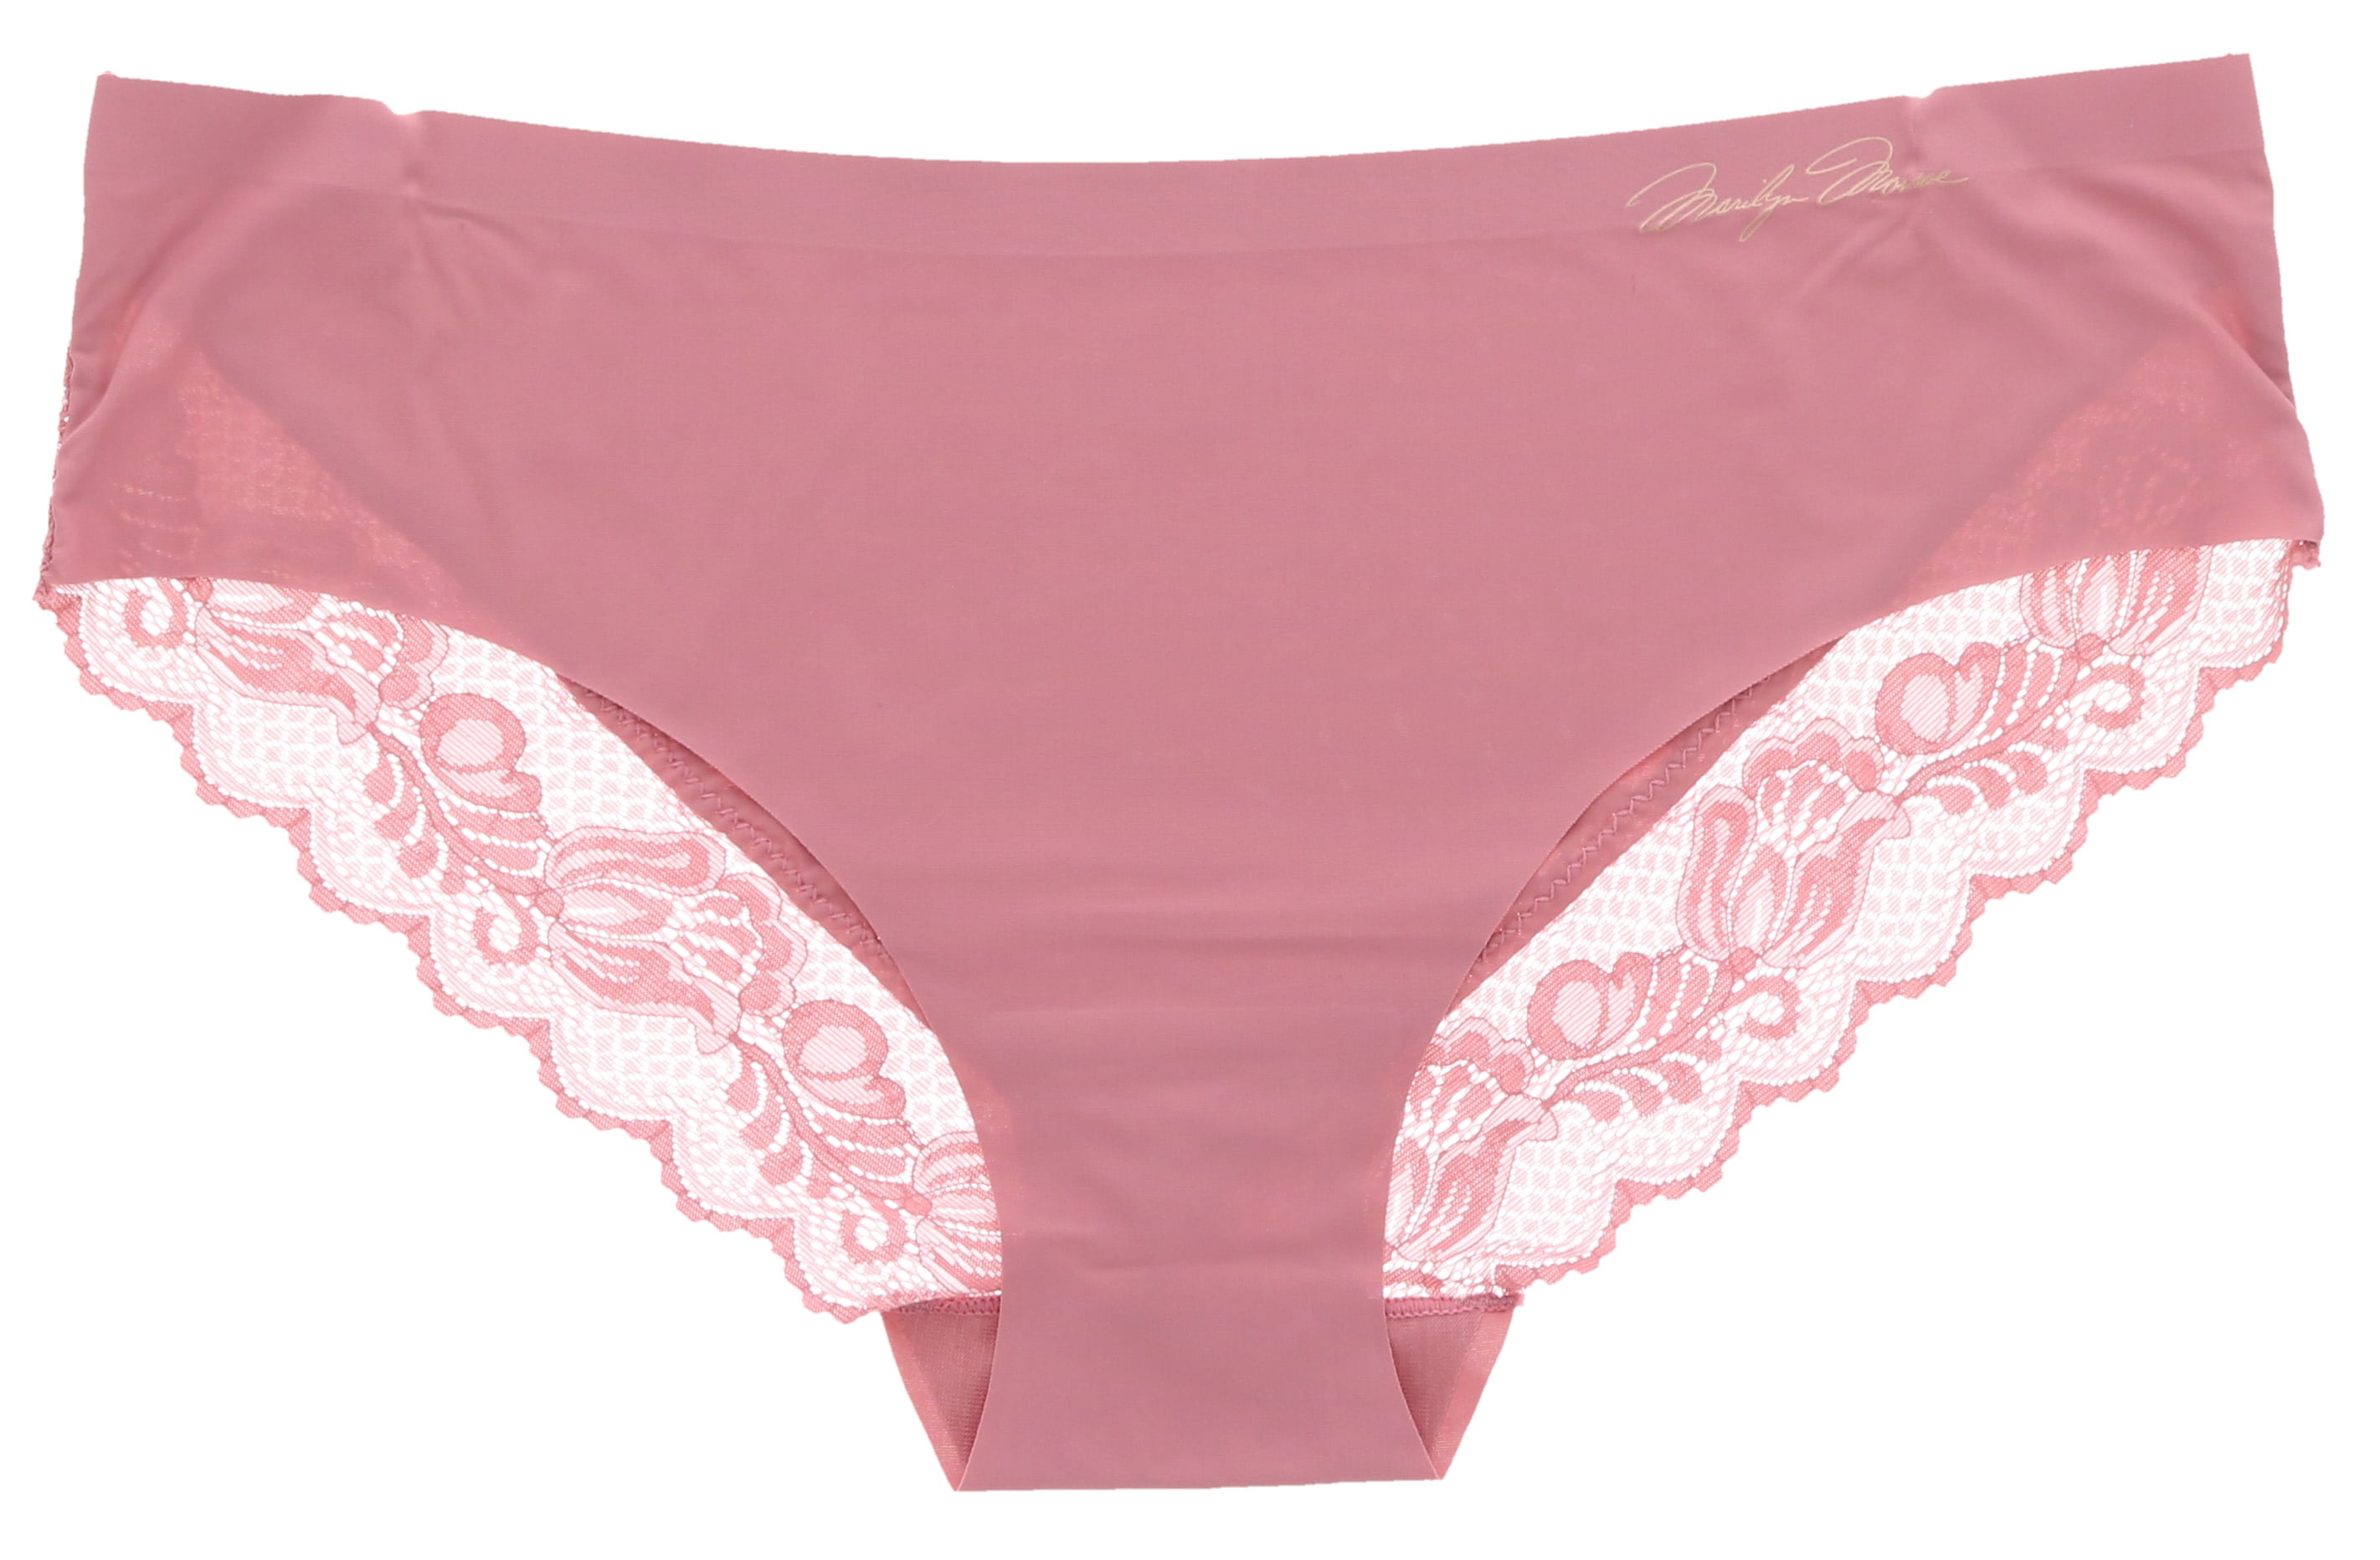 Marilyn Monroe Women's Sexy Lace Hipster Brief Panties 5 Pack - Vintage  Pink Coral Floral - Large 